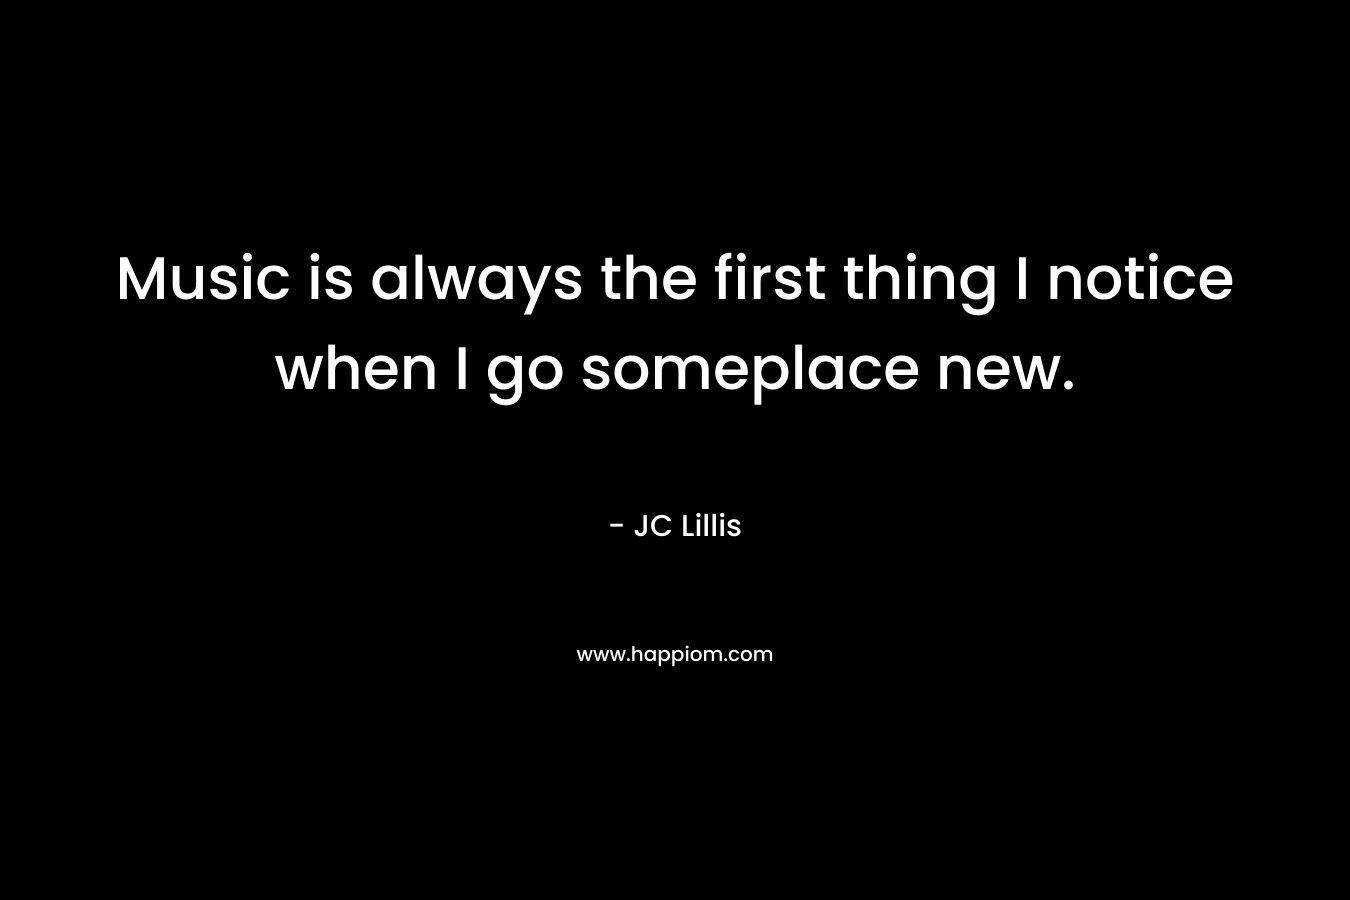 Music is always the first thing I notice when I go someplace new. – JC Lillis